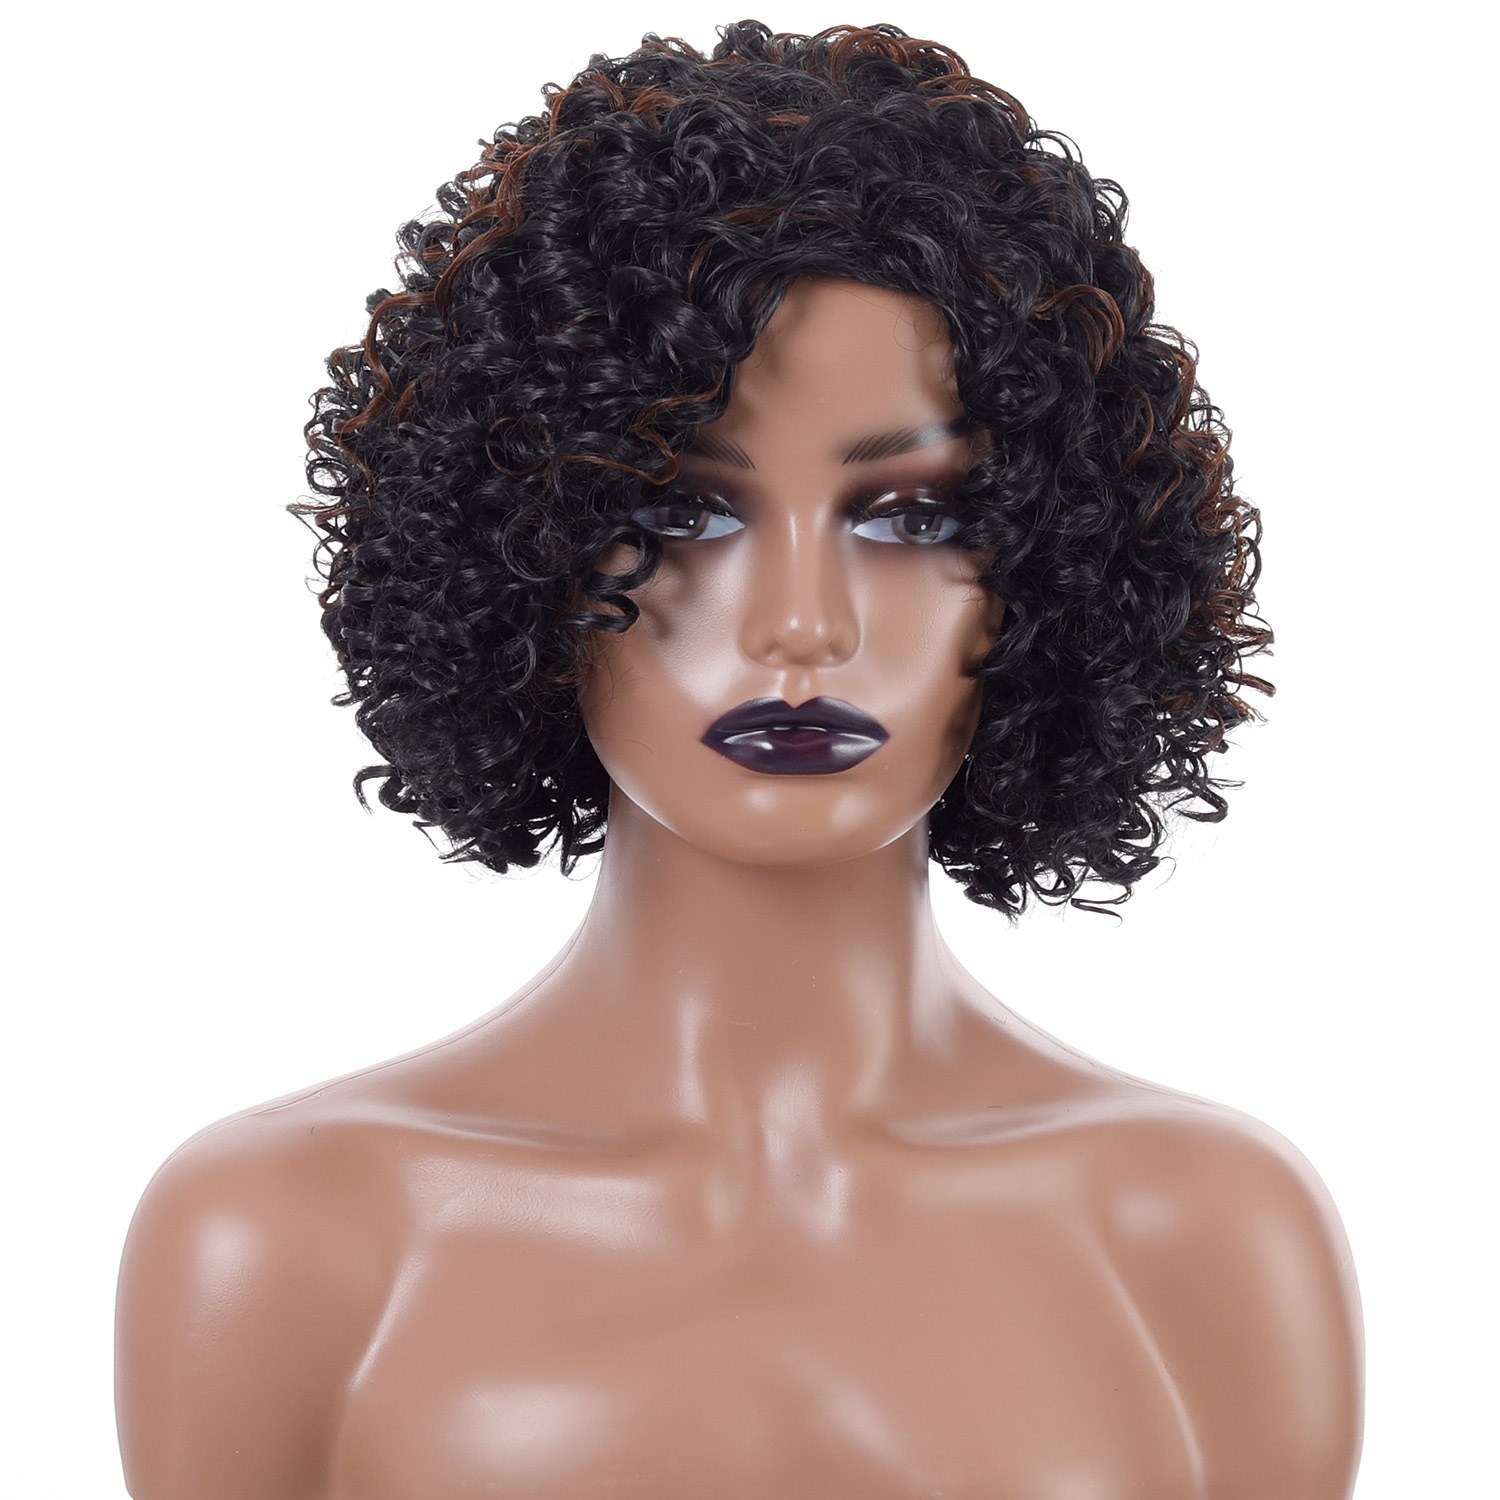 Stylish black highlight brown synthetic wig featuring short curly hair with afro small curly wig headgear for women